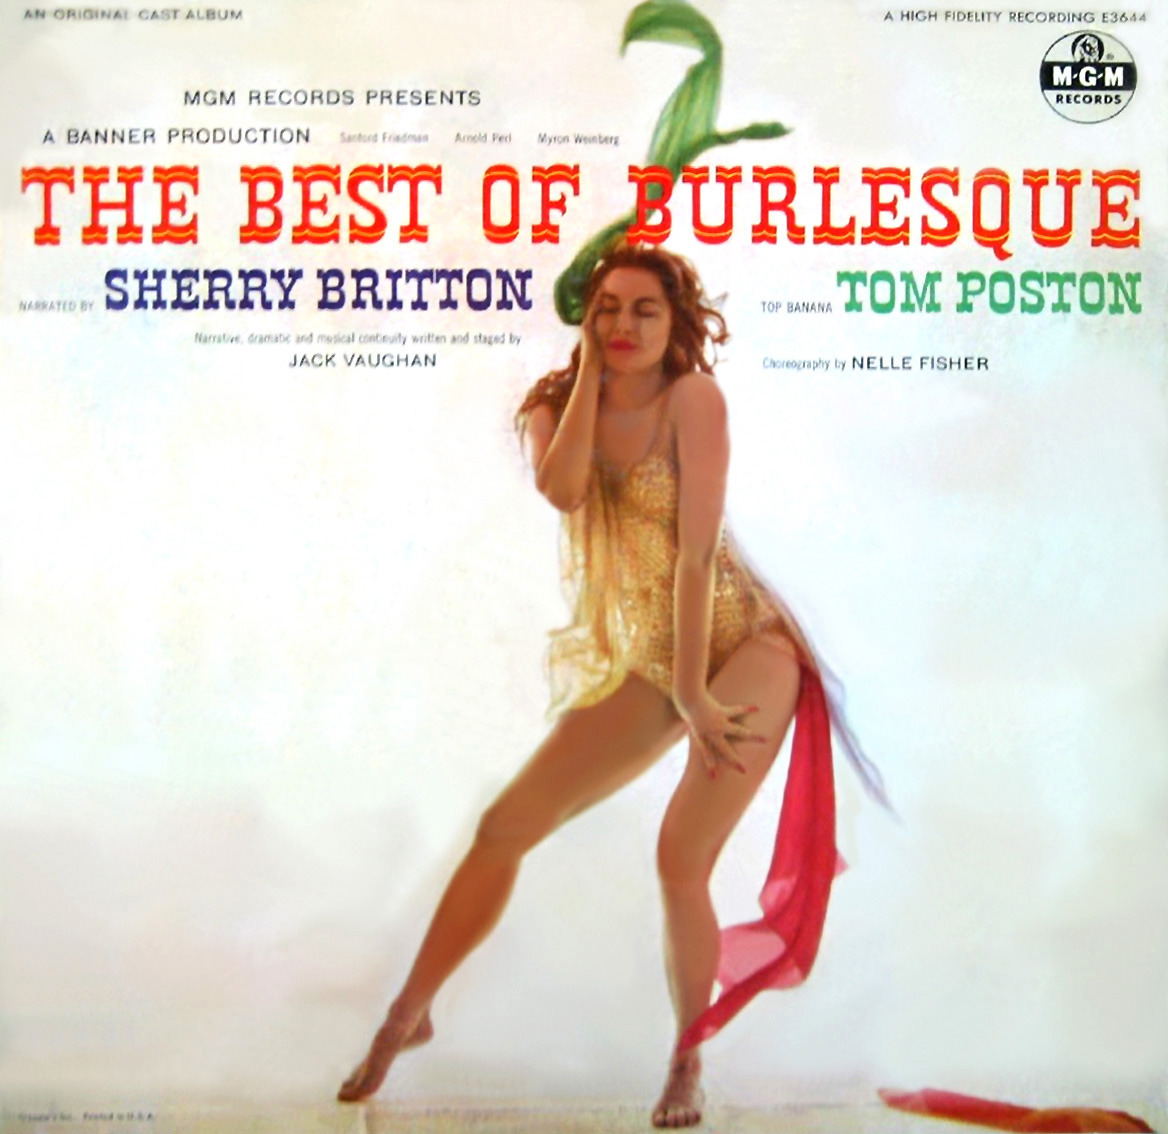 Julie Newmar appears on the cover of ‘The Best Of Burlesque’ record album.. This